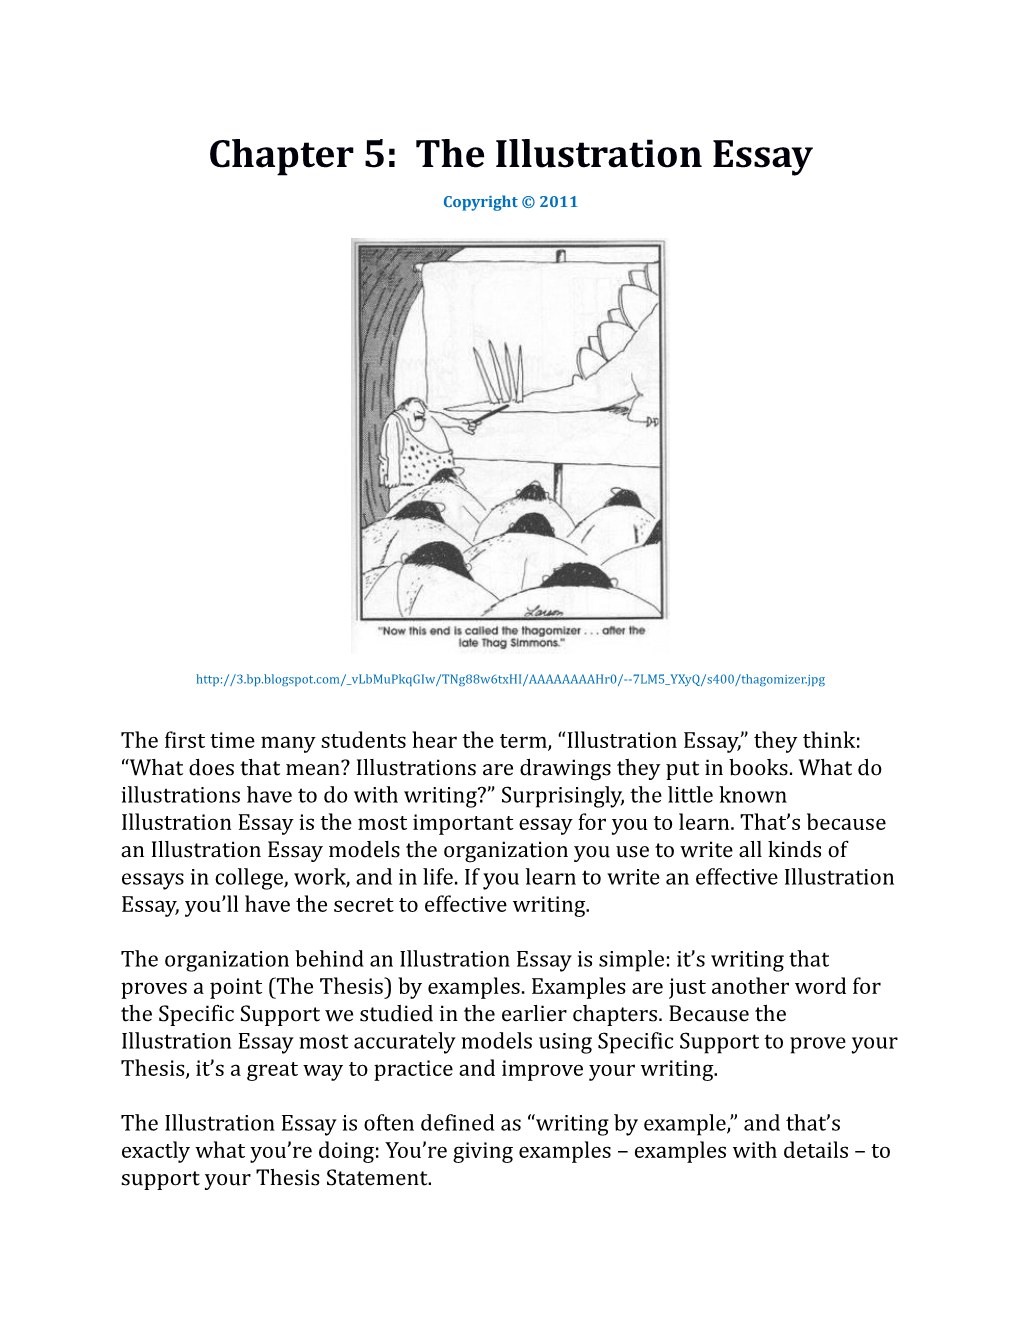 Chapter 5: the Illustration Essay